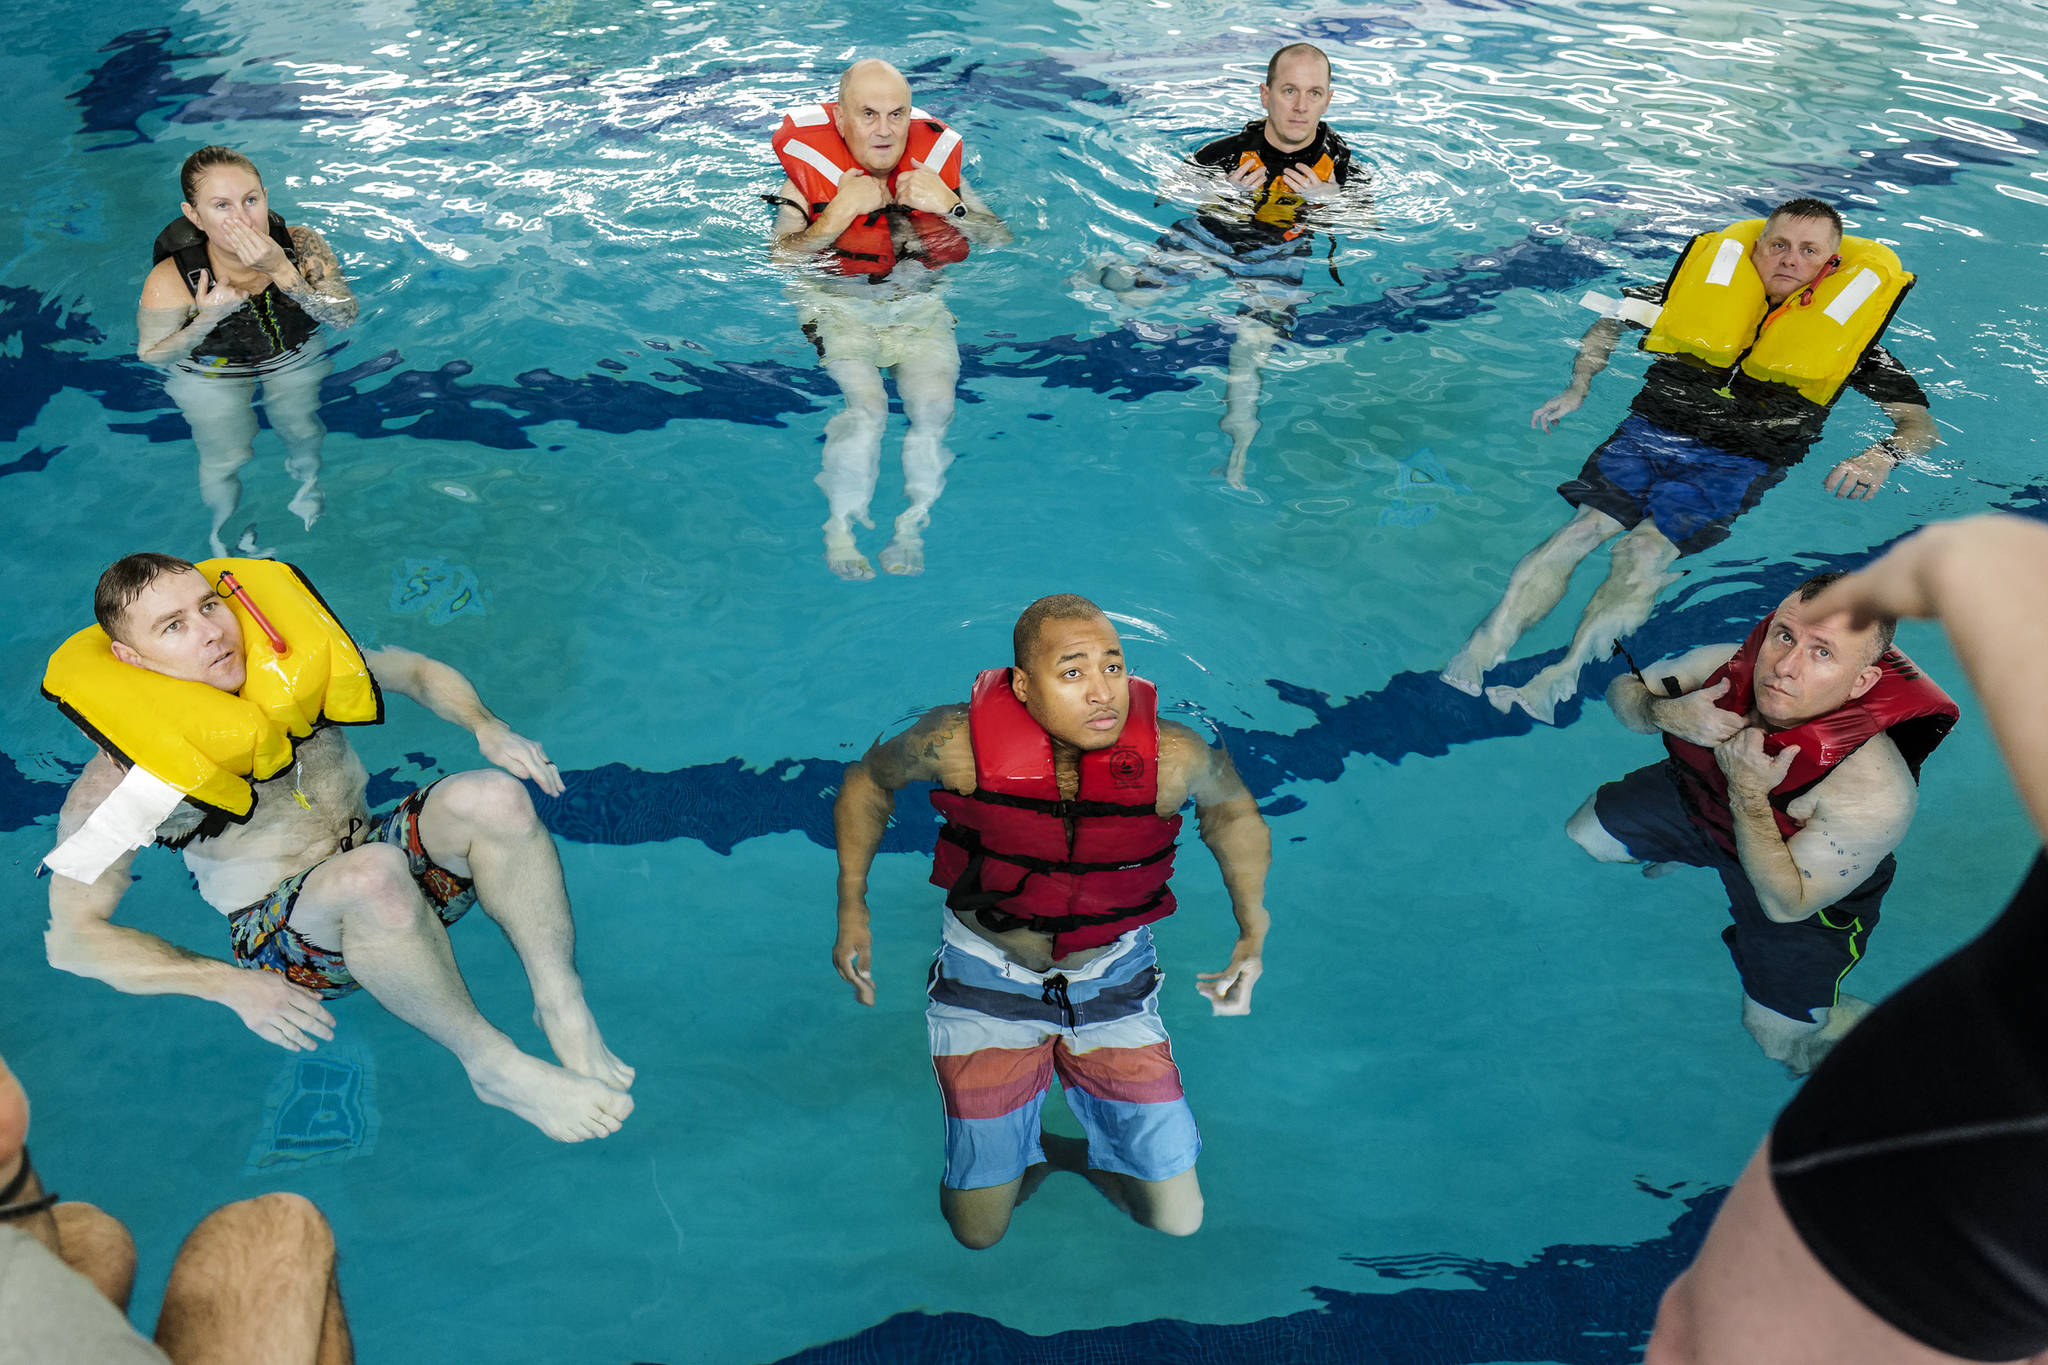 Members of the U.S. Coast Guard stationed in Juneau take a boating safety training class at the Augustus Brown Swimming Pool on Tuesday, Nov. 19, 2019. The class will qualify the members to teach students around the state about the use and importance of life vests. (Michael Penn | Juneau Empire)